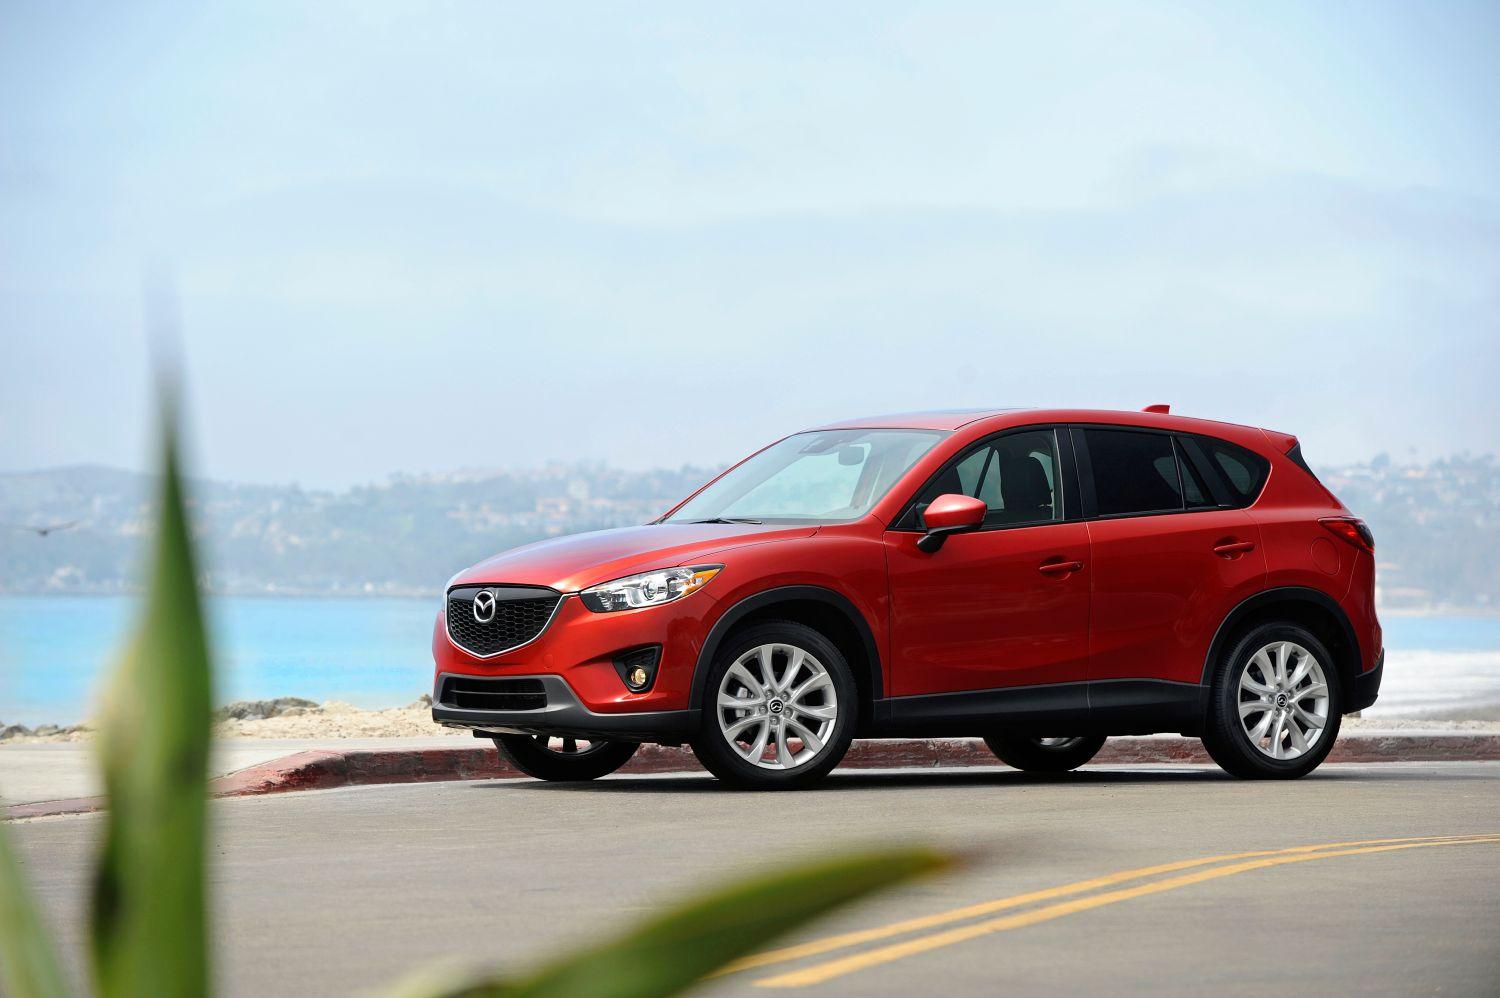 A red 2015 Mazda CX-5 on display.